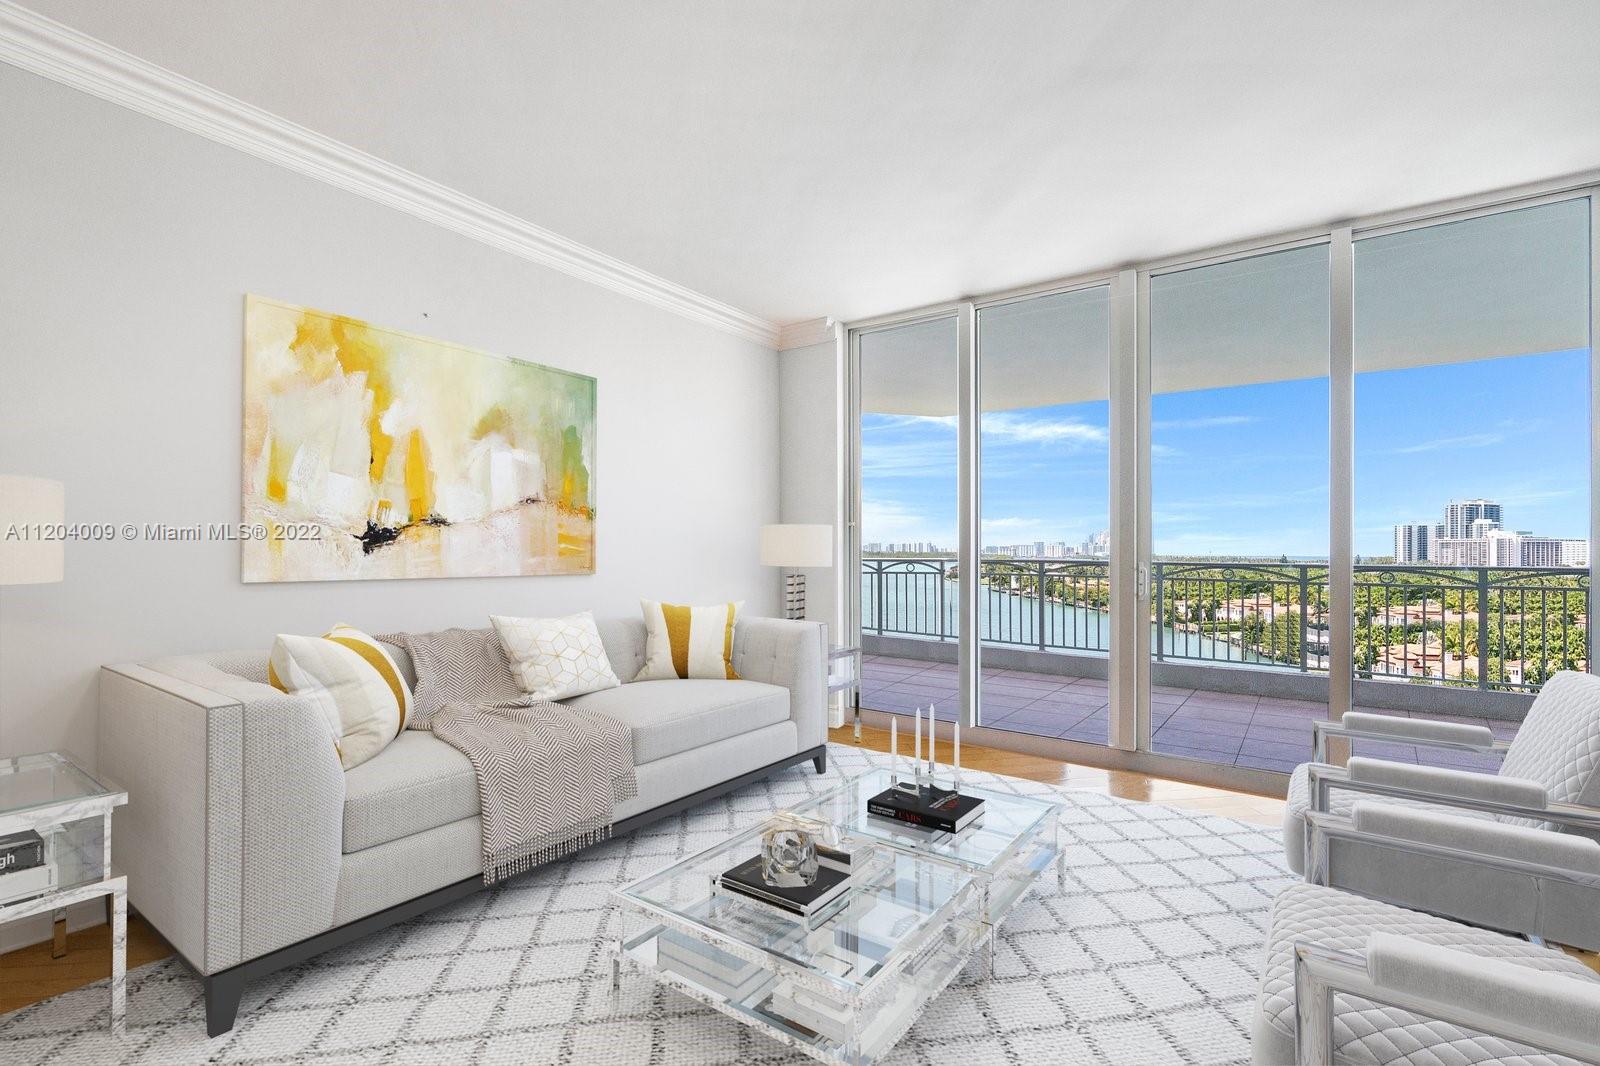 Amazing opportunity to purchase this rare 1,833 SF Large 3 Bedroom unit in a luxurious building with private elevators that open directly into the unit. Enjoy beautiful water views that overlook Bal Harbour and Sunny Isles. This unit includes Hardwood Floors, 9ft Ceilings, Crown Moldings, Split Floorplan, Laundry Room, New HVAC, High Impact Windows & Doors, Stainless Steel Appliances, Jacuzzi Tub, 2 Large Balconies, East to West Water Views, 2 Covered Parking Spaces #25-#26, and 1 Storage Locker. Enjoy the amenities such as Pool, Gym, Jacuzzi, Sauna, 24 Hour Doorman, and Ocean Access! Located 1 block North of Pura Vida in Bay Harbor Islands. Enjoy living walking distance to the Beach, Bal Harbour Shops, Restaurants, and more in one of the safest neighborhoods in Florida!